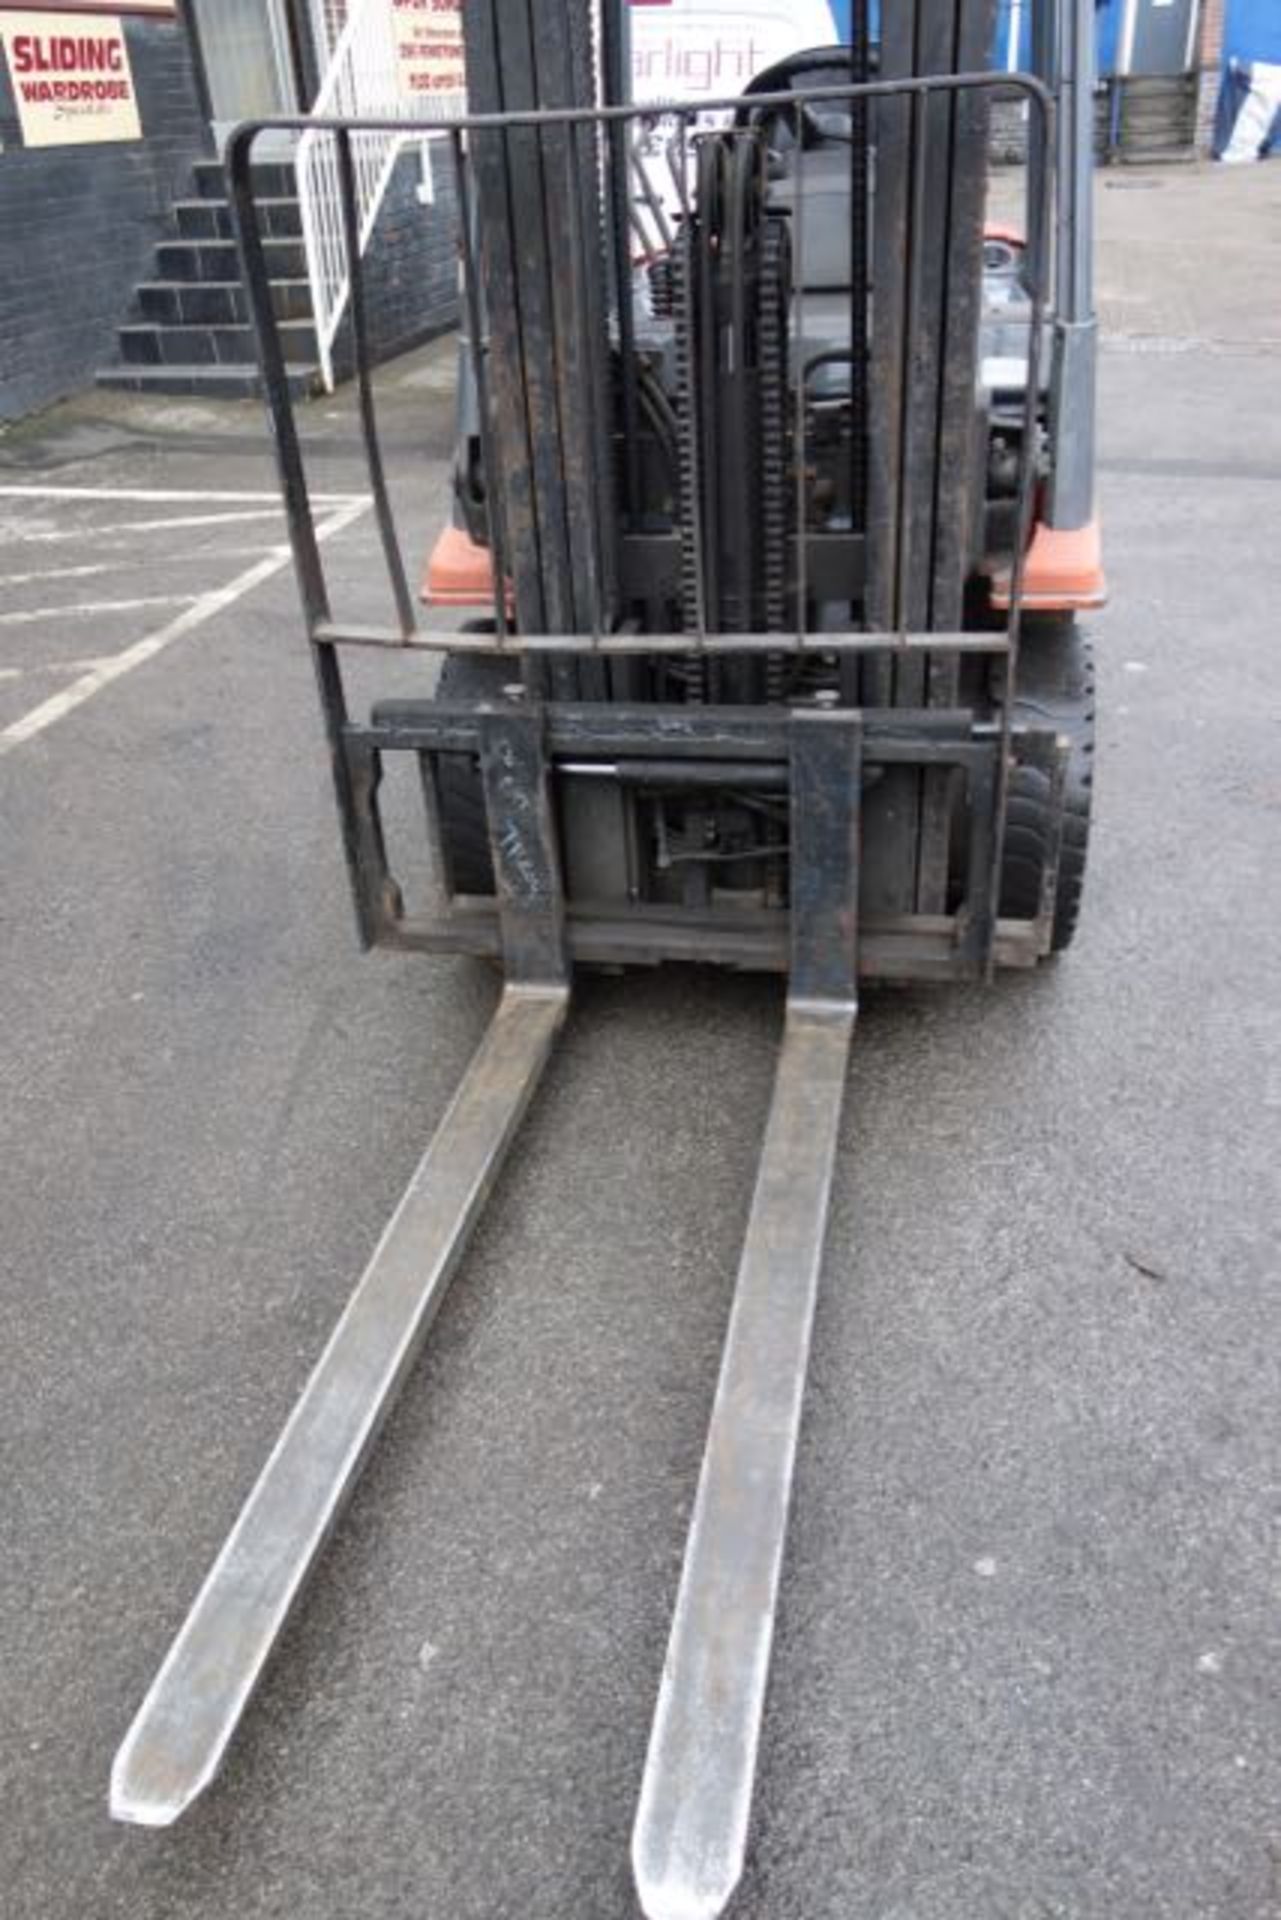 2003 Toyota 25 2.5 Tonne Diesel Forklift Truck. Max lift height. 4.1m. Side Shift. Full Working - Image 6 of 8